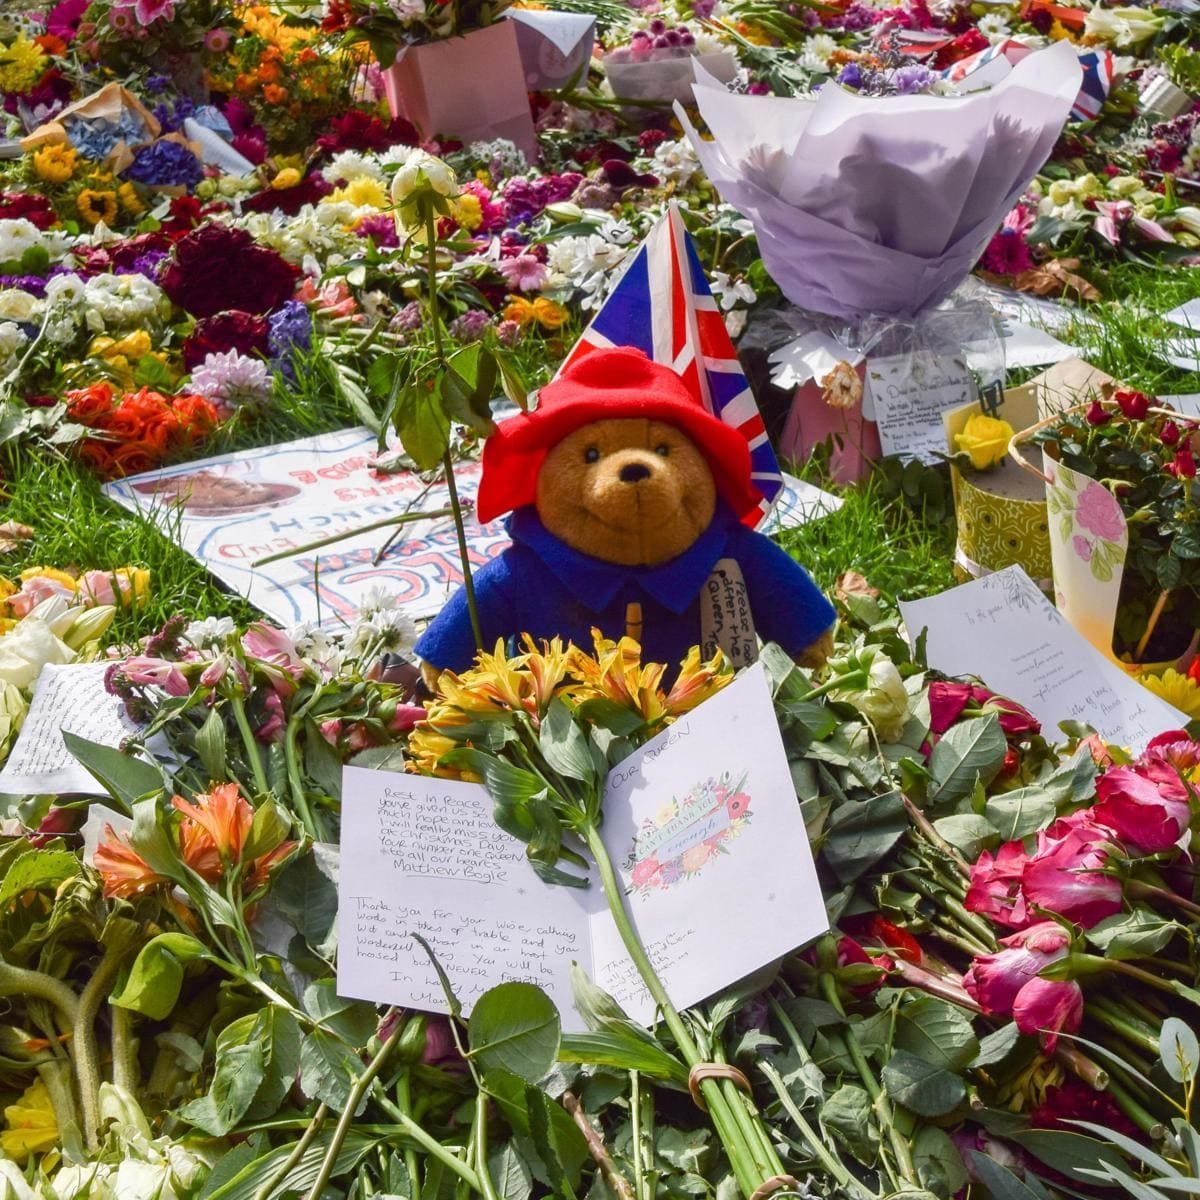 A Paddington Bear toy sits among the floral tributes for the